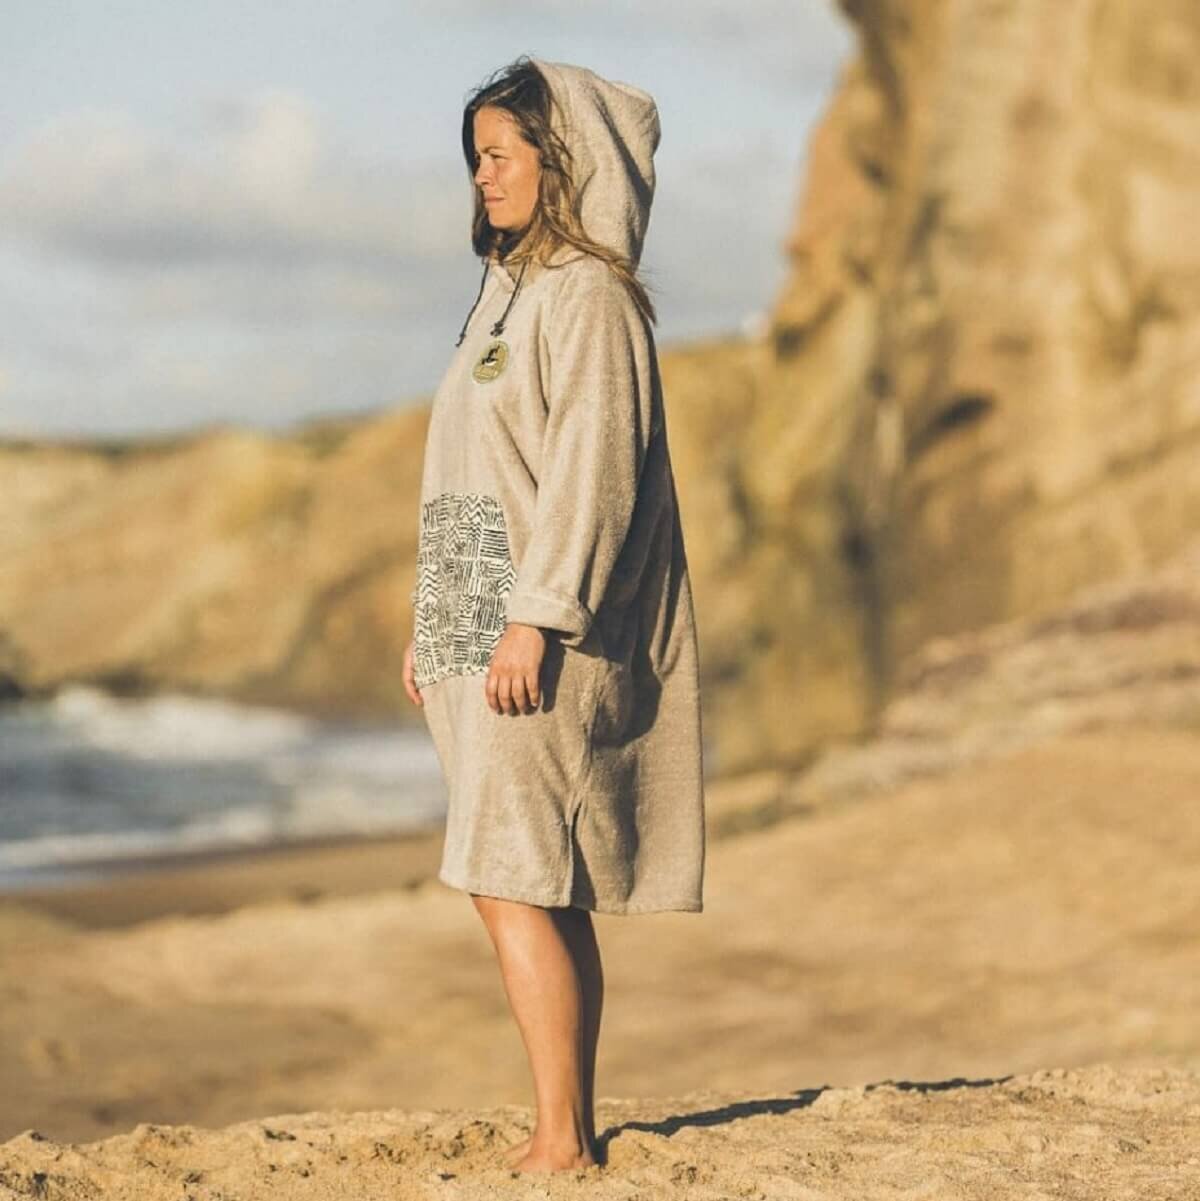 yderligere give molekyle Creativity for sustsainability: The story behind Big Raven's upcycled surf- ponchos